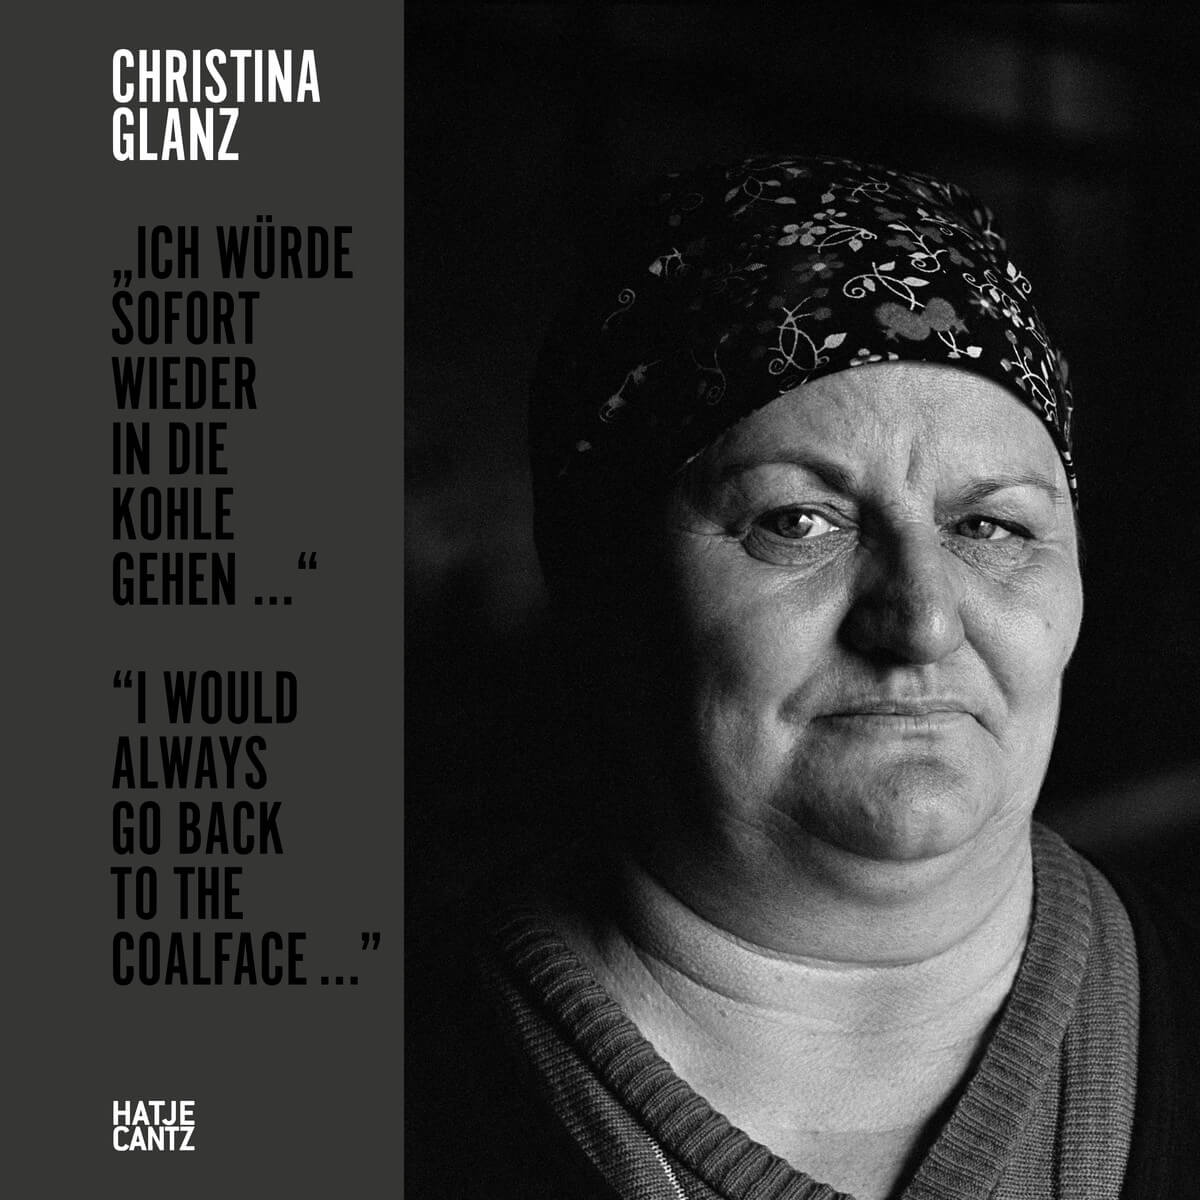 Front cover of Christina Glanz: "I would always go back to the coalface...", featuring a black and white image of a woman looking into the camera.